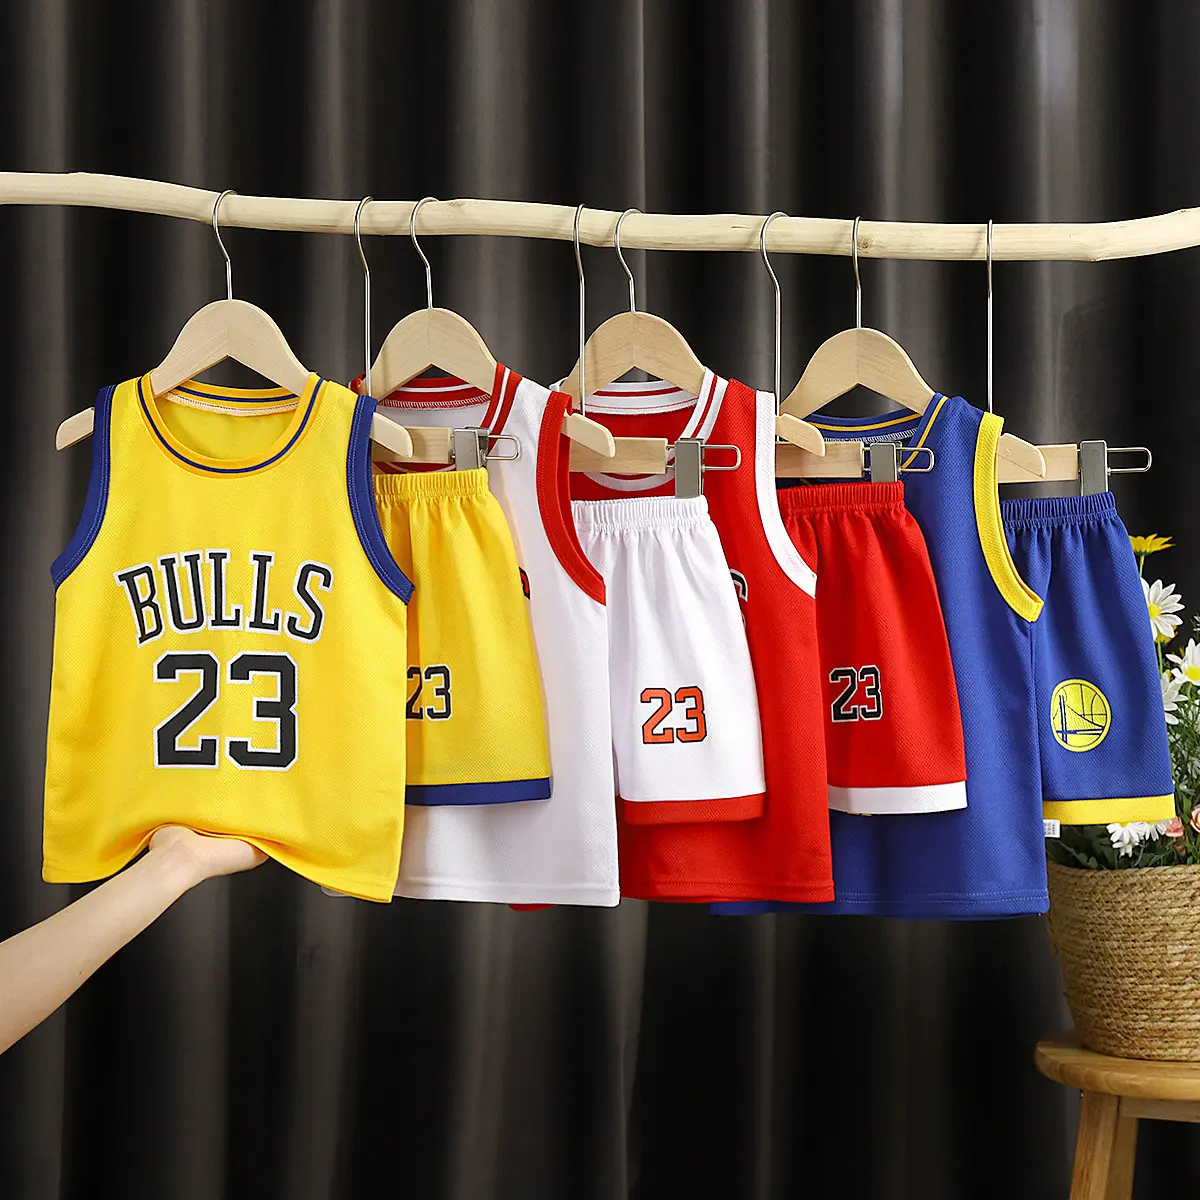 New cheap Toddler Plain kids basketball jersey set Boys Girls basketball clothes Baby clothes Boys top + pants 2-8Y